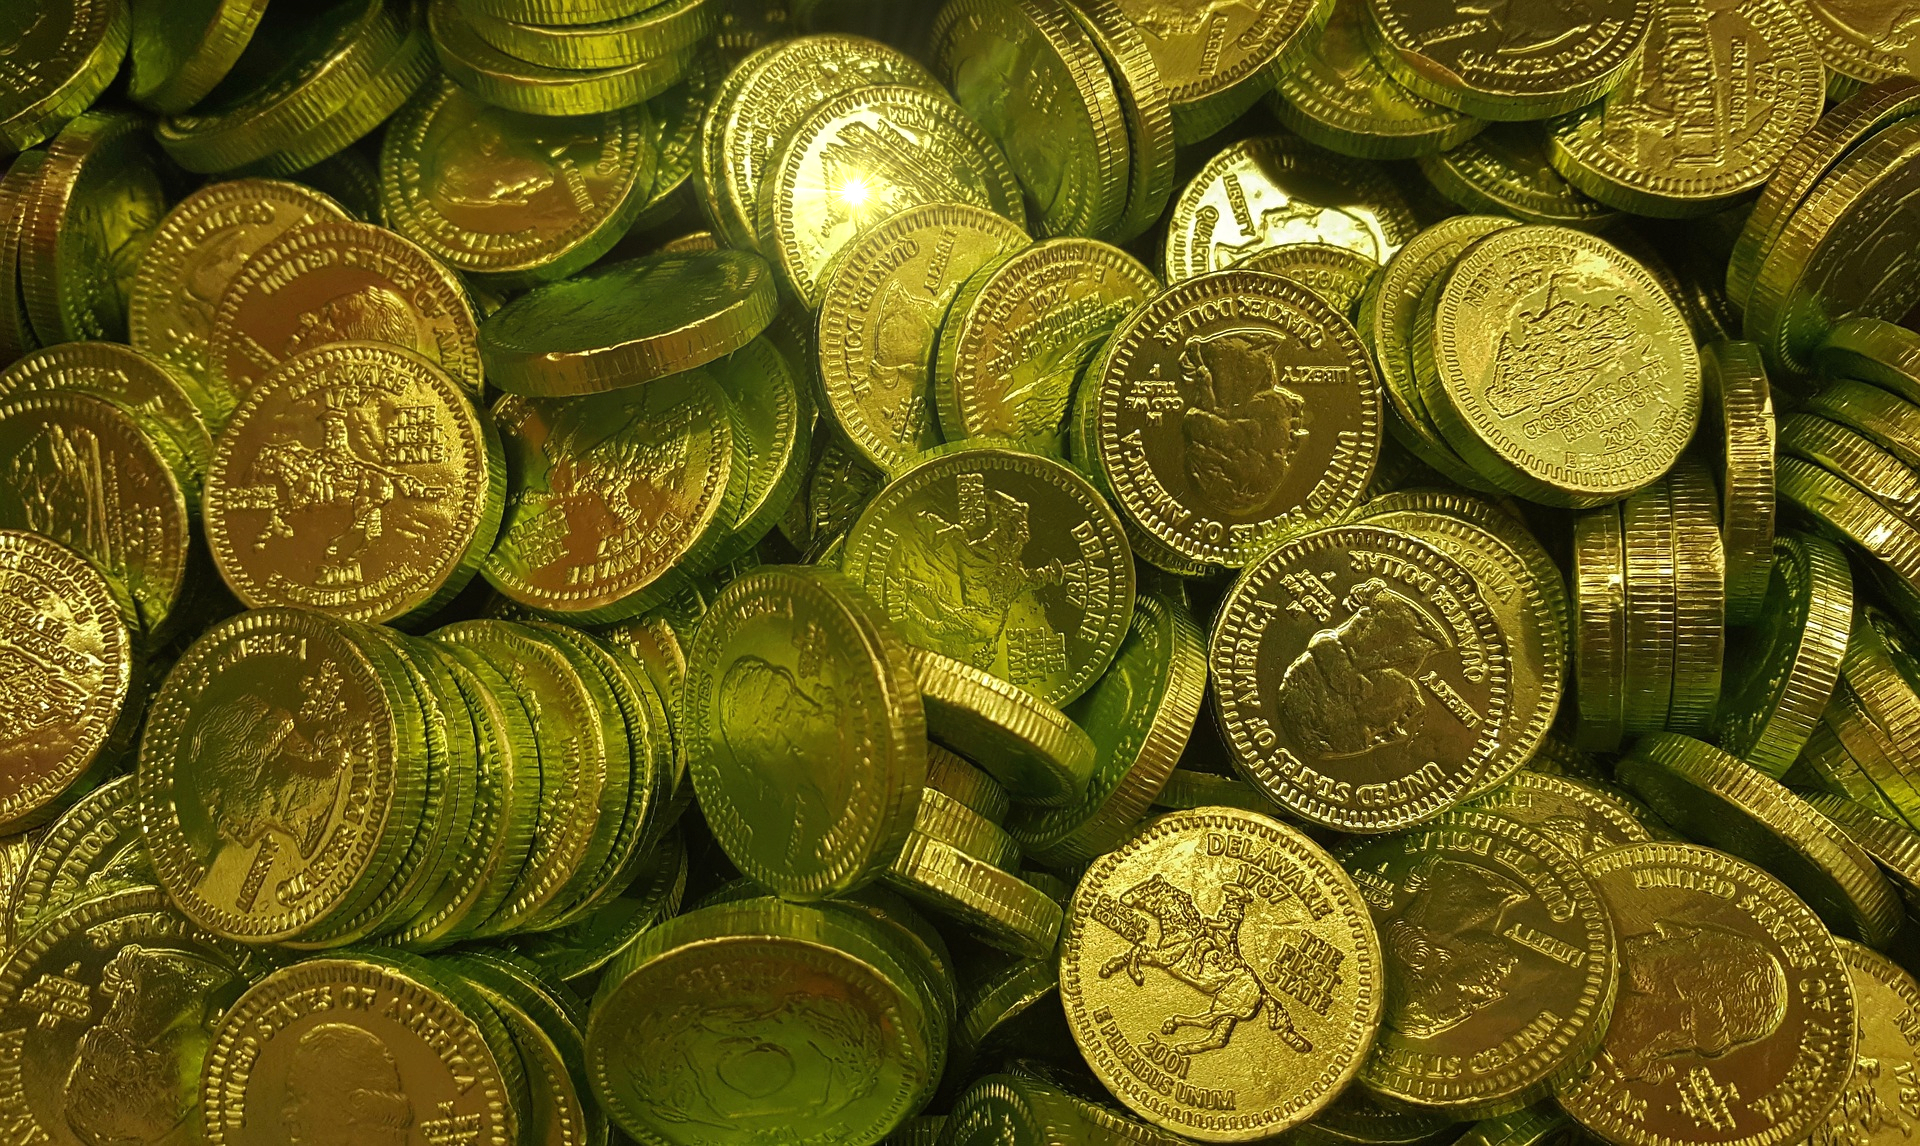 The Gold Coins Of Prosperity!